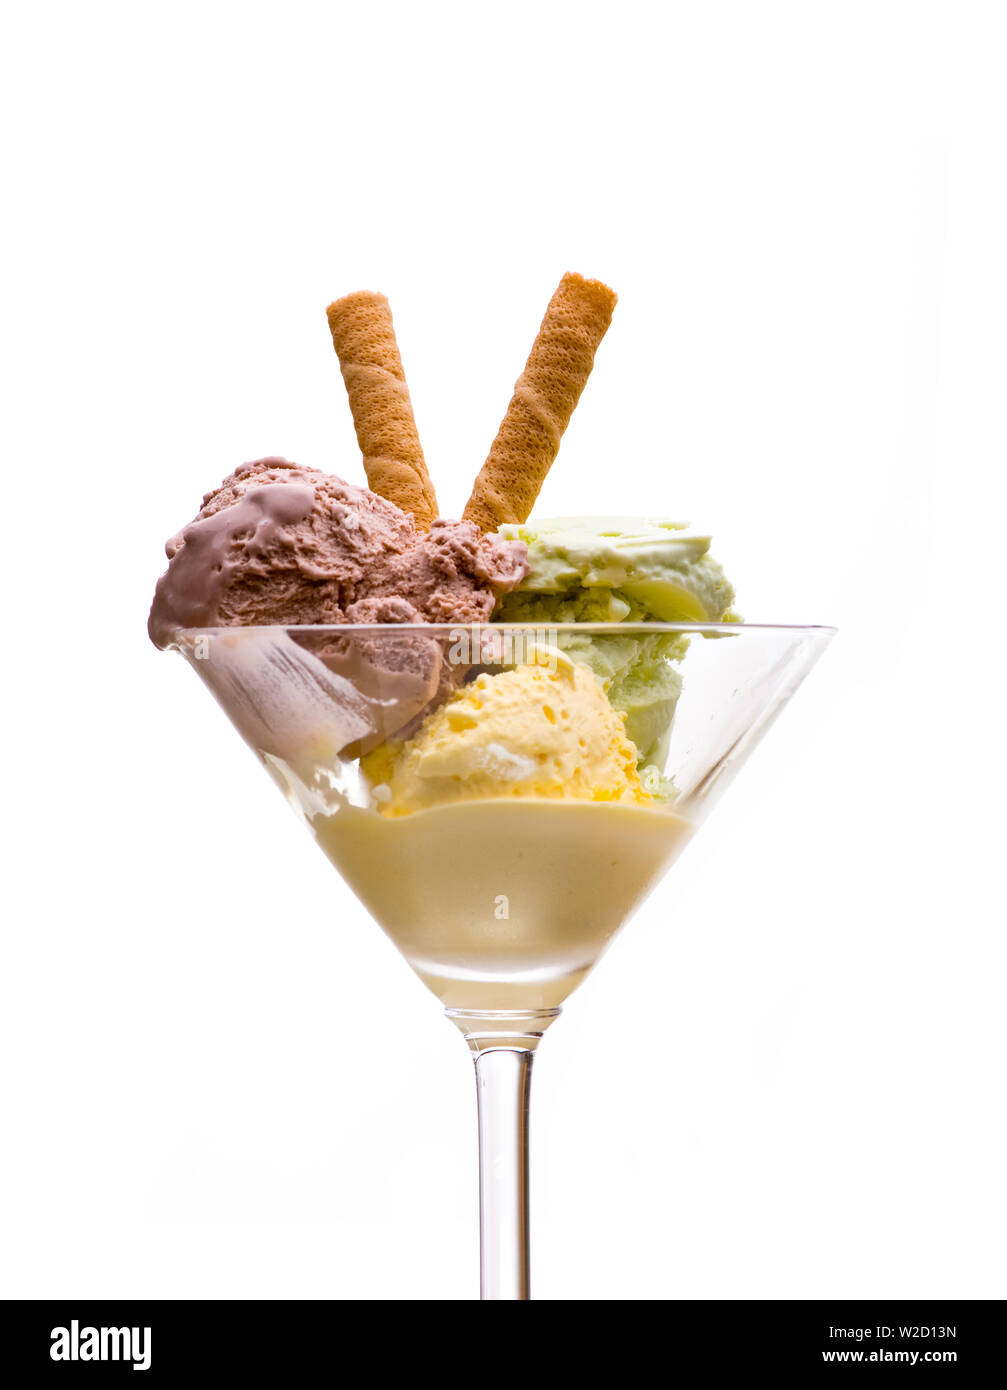 ice cream sundae: front view of ice cream sundae with yellow, green and brown ice cream with waffle in a martini glass on white background Stock Photo